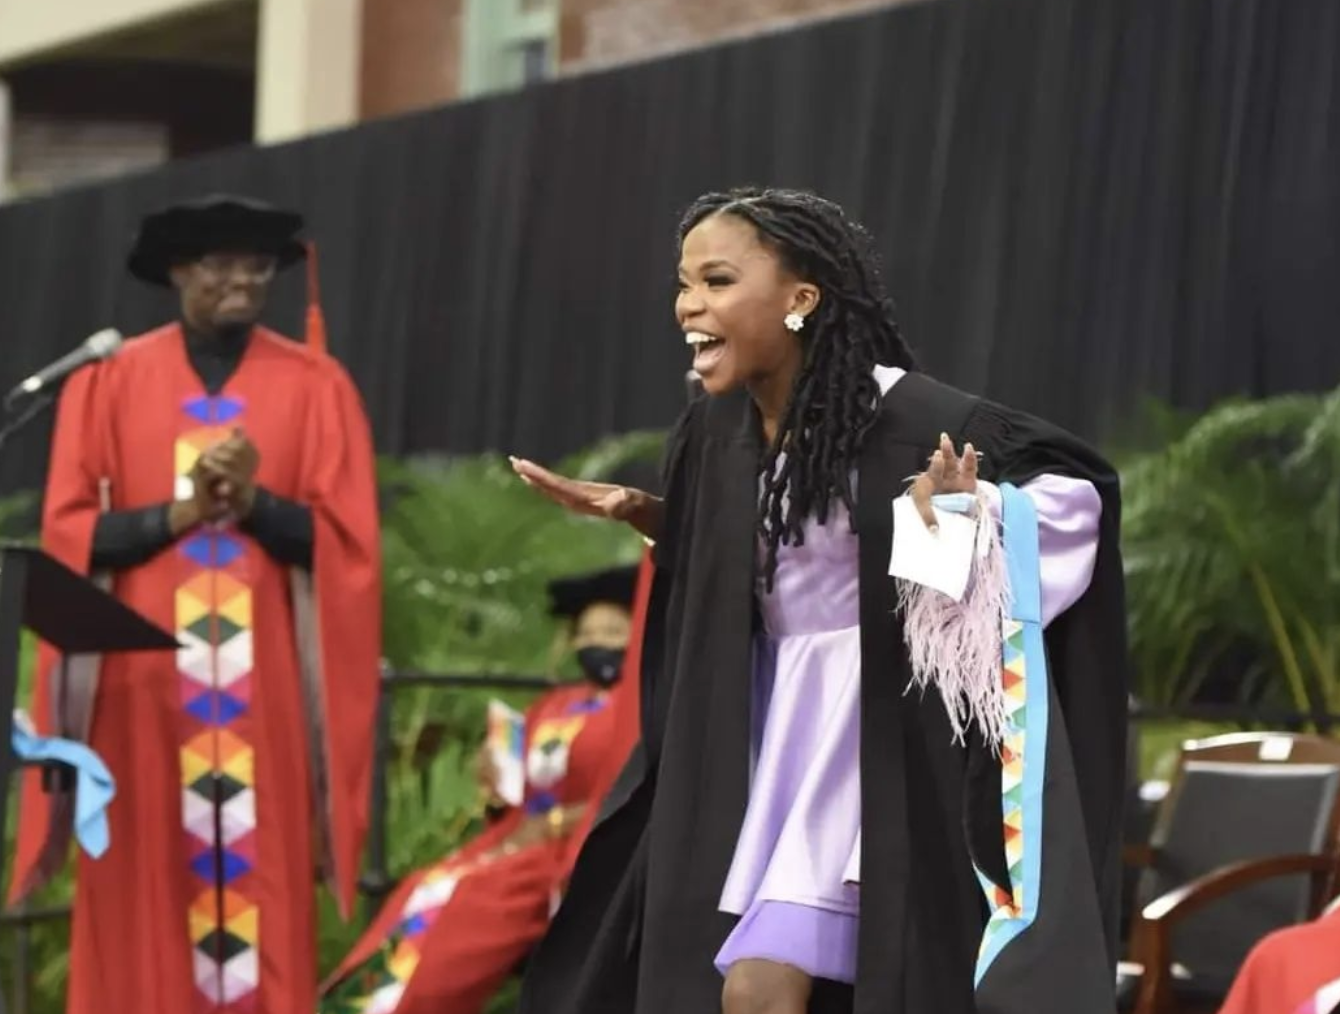 WATCH: Nomfundo Moh steals the show as she graduates at UKZN